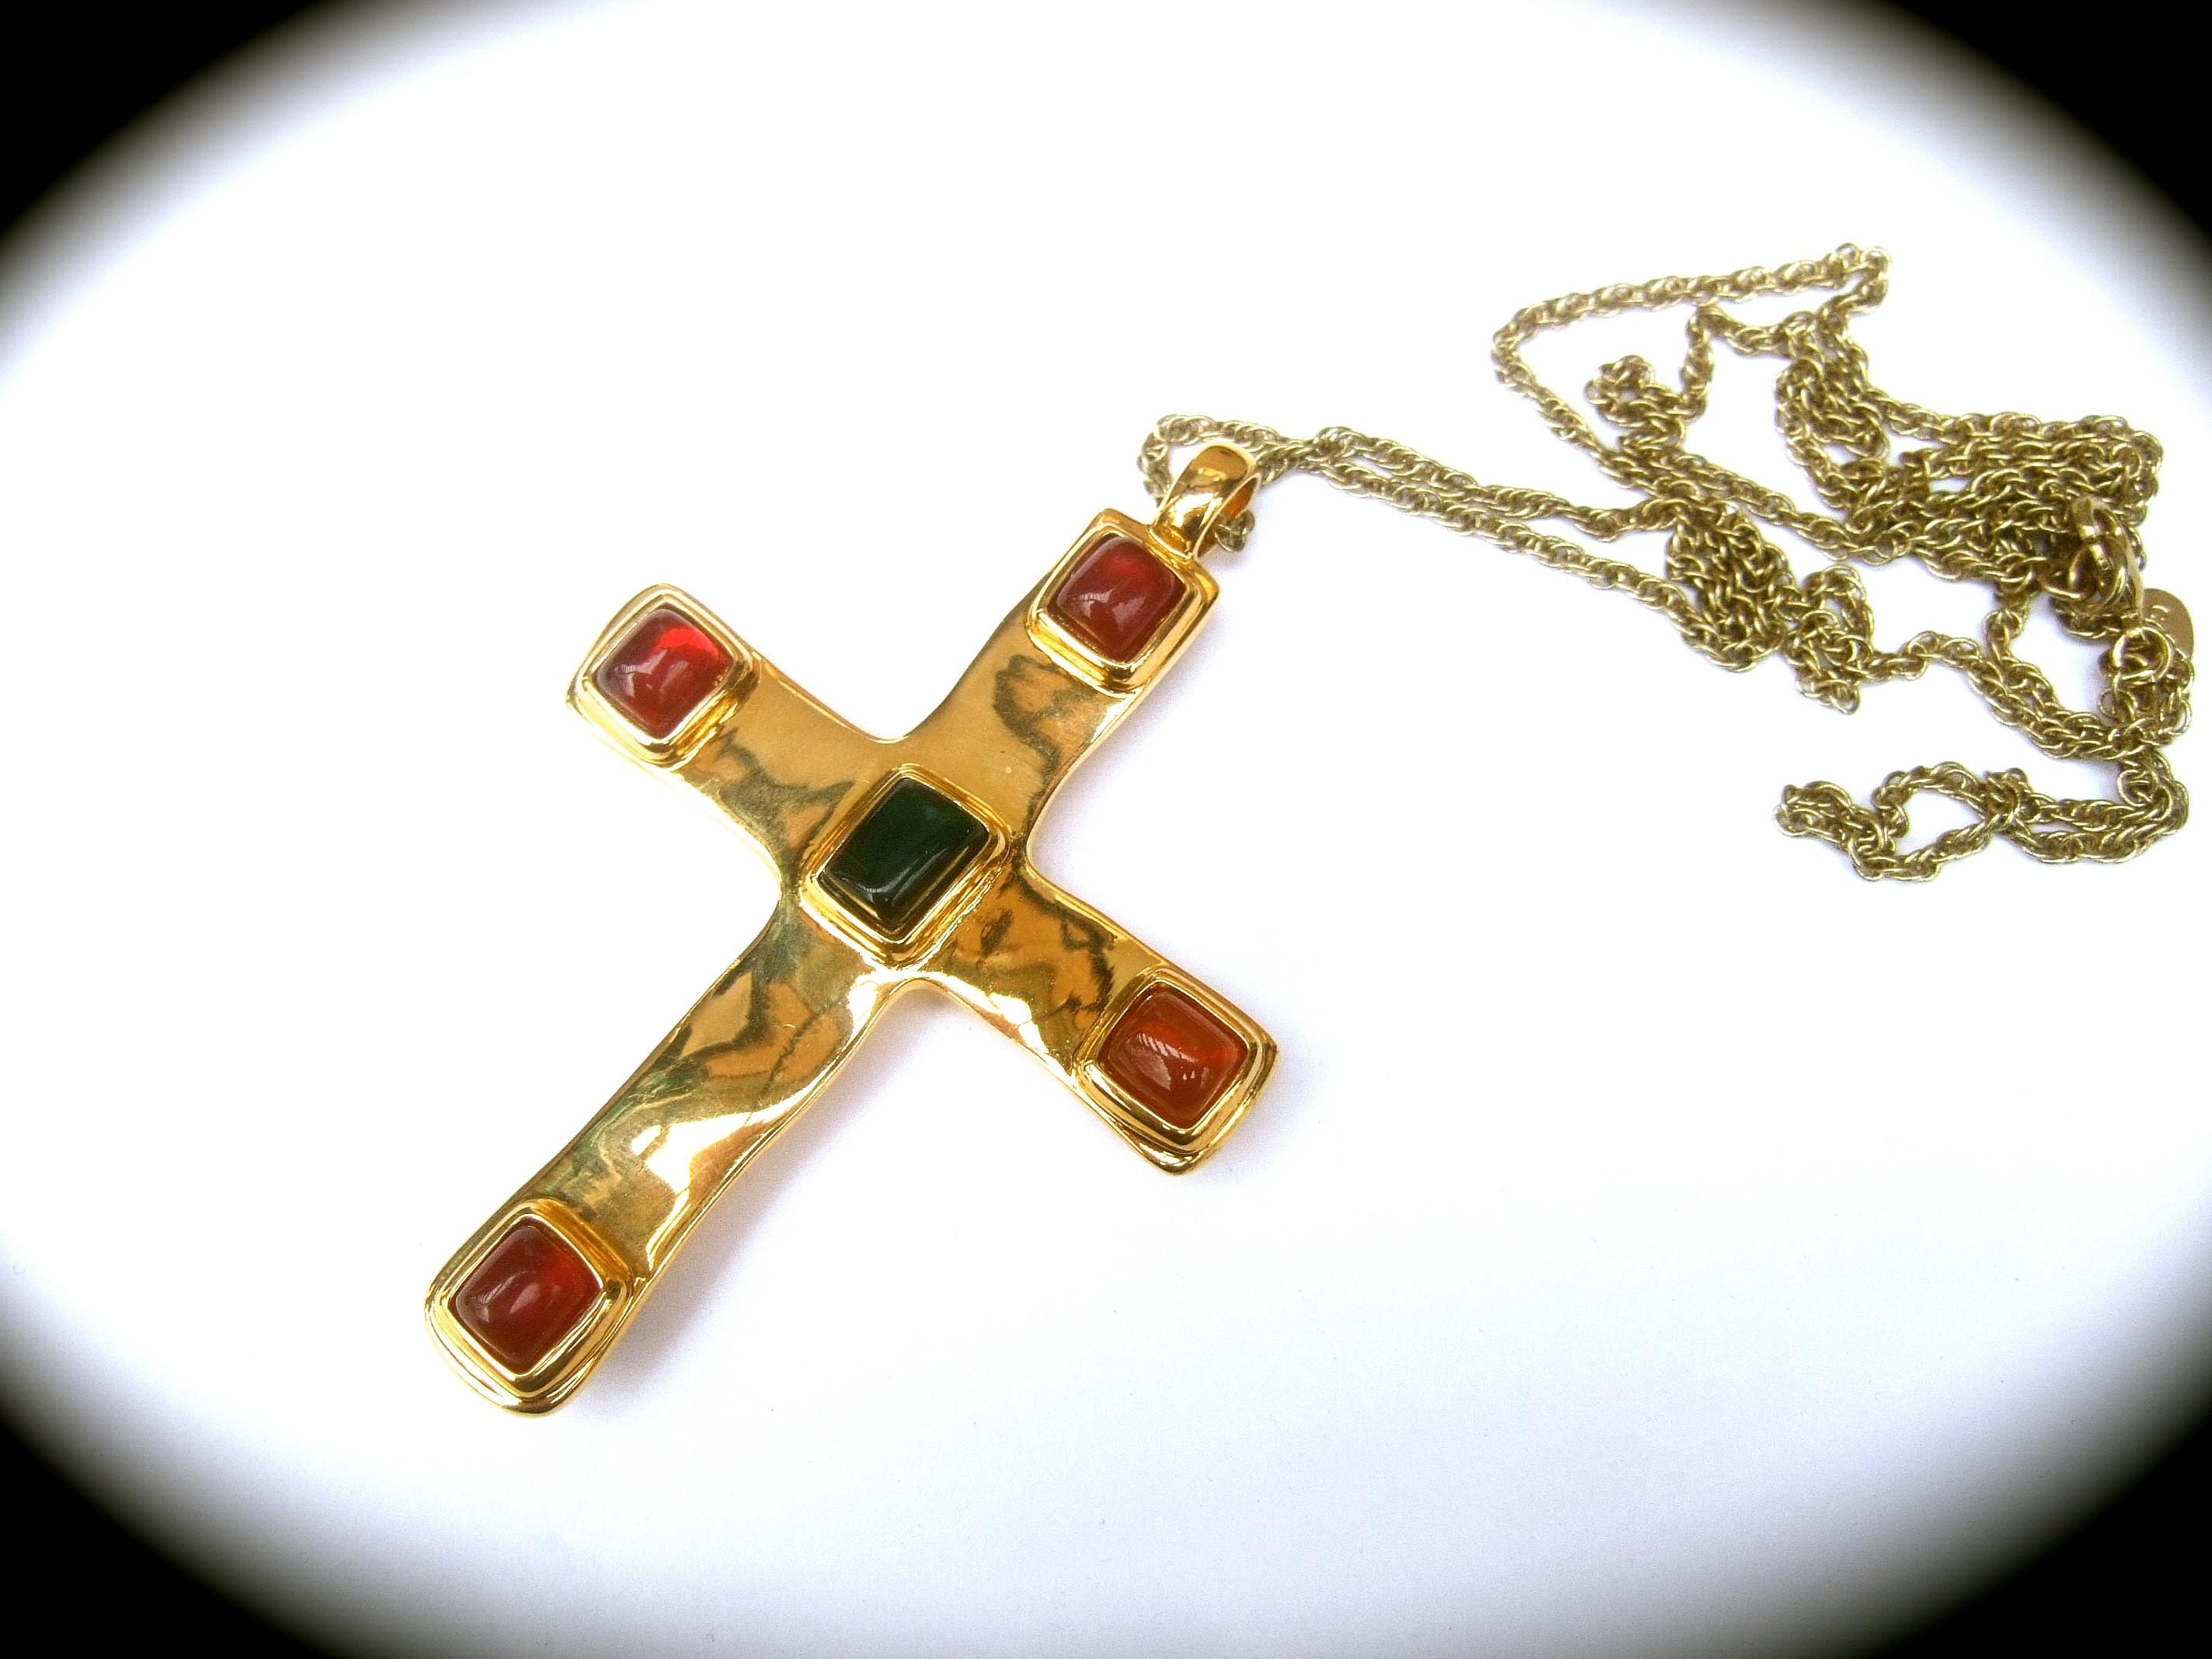 Dellio Large gilt metal poured resin cabochon pendant necklace
The large scale shiny gilt metal cross is embellished with jewel tone square smooth resin cabochons in a myriad of colors 

The collection of smooth resin cabochons are mounted on both